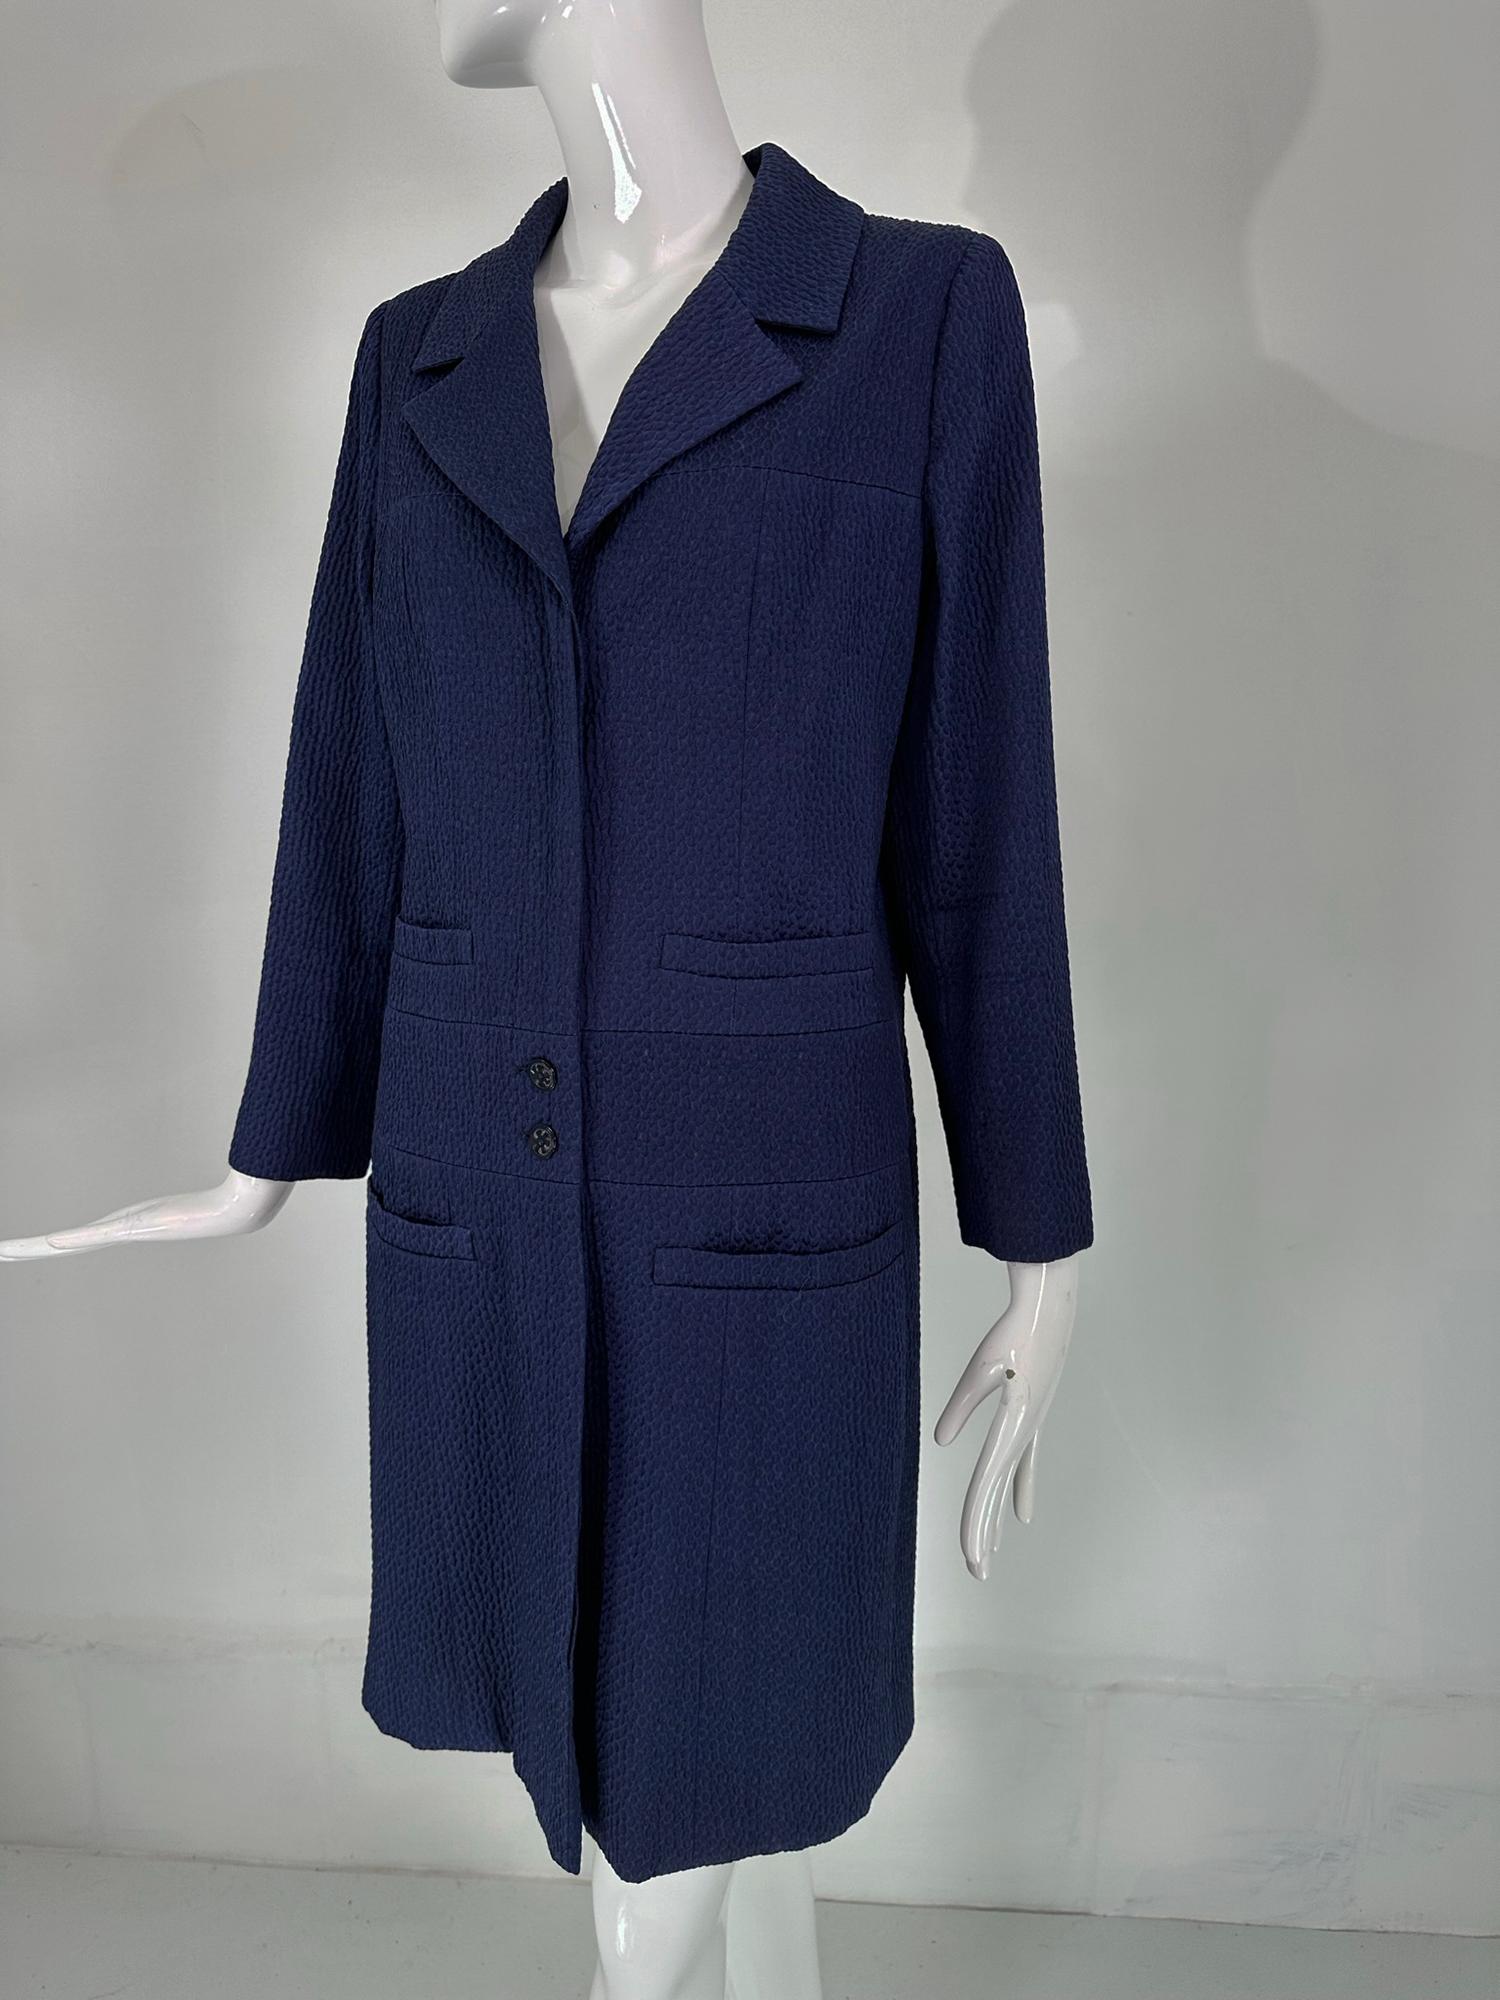 Chanel navy blue single breasted 4 pocket cloque cotton coat fits a size 4. Classic single breasted coat with a notched lapel collar, placket front closure, two blue Chanel buttons at the waist, the Chanel buttons at the top & below the waist are